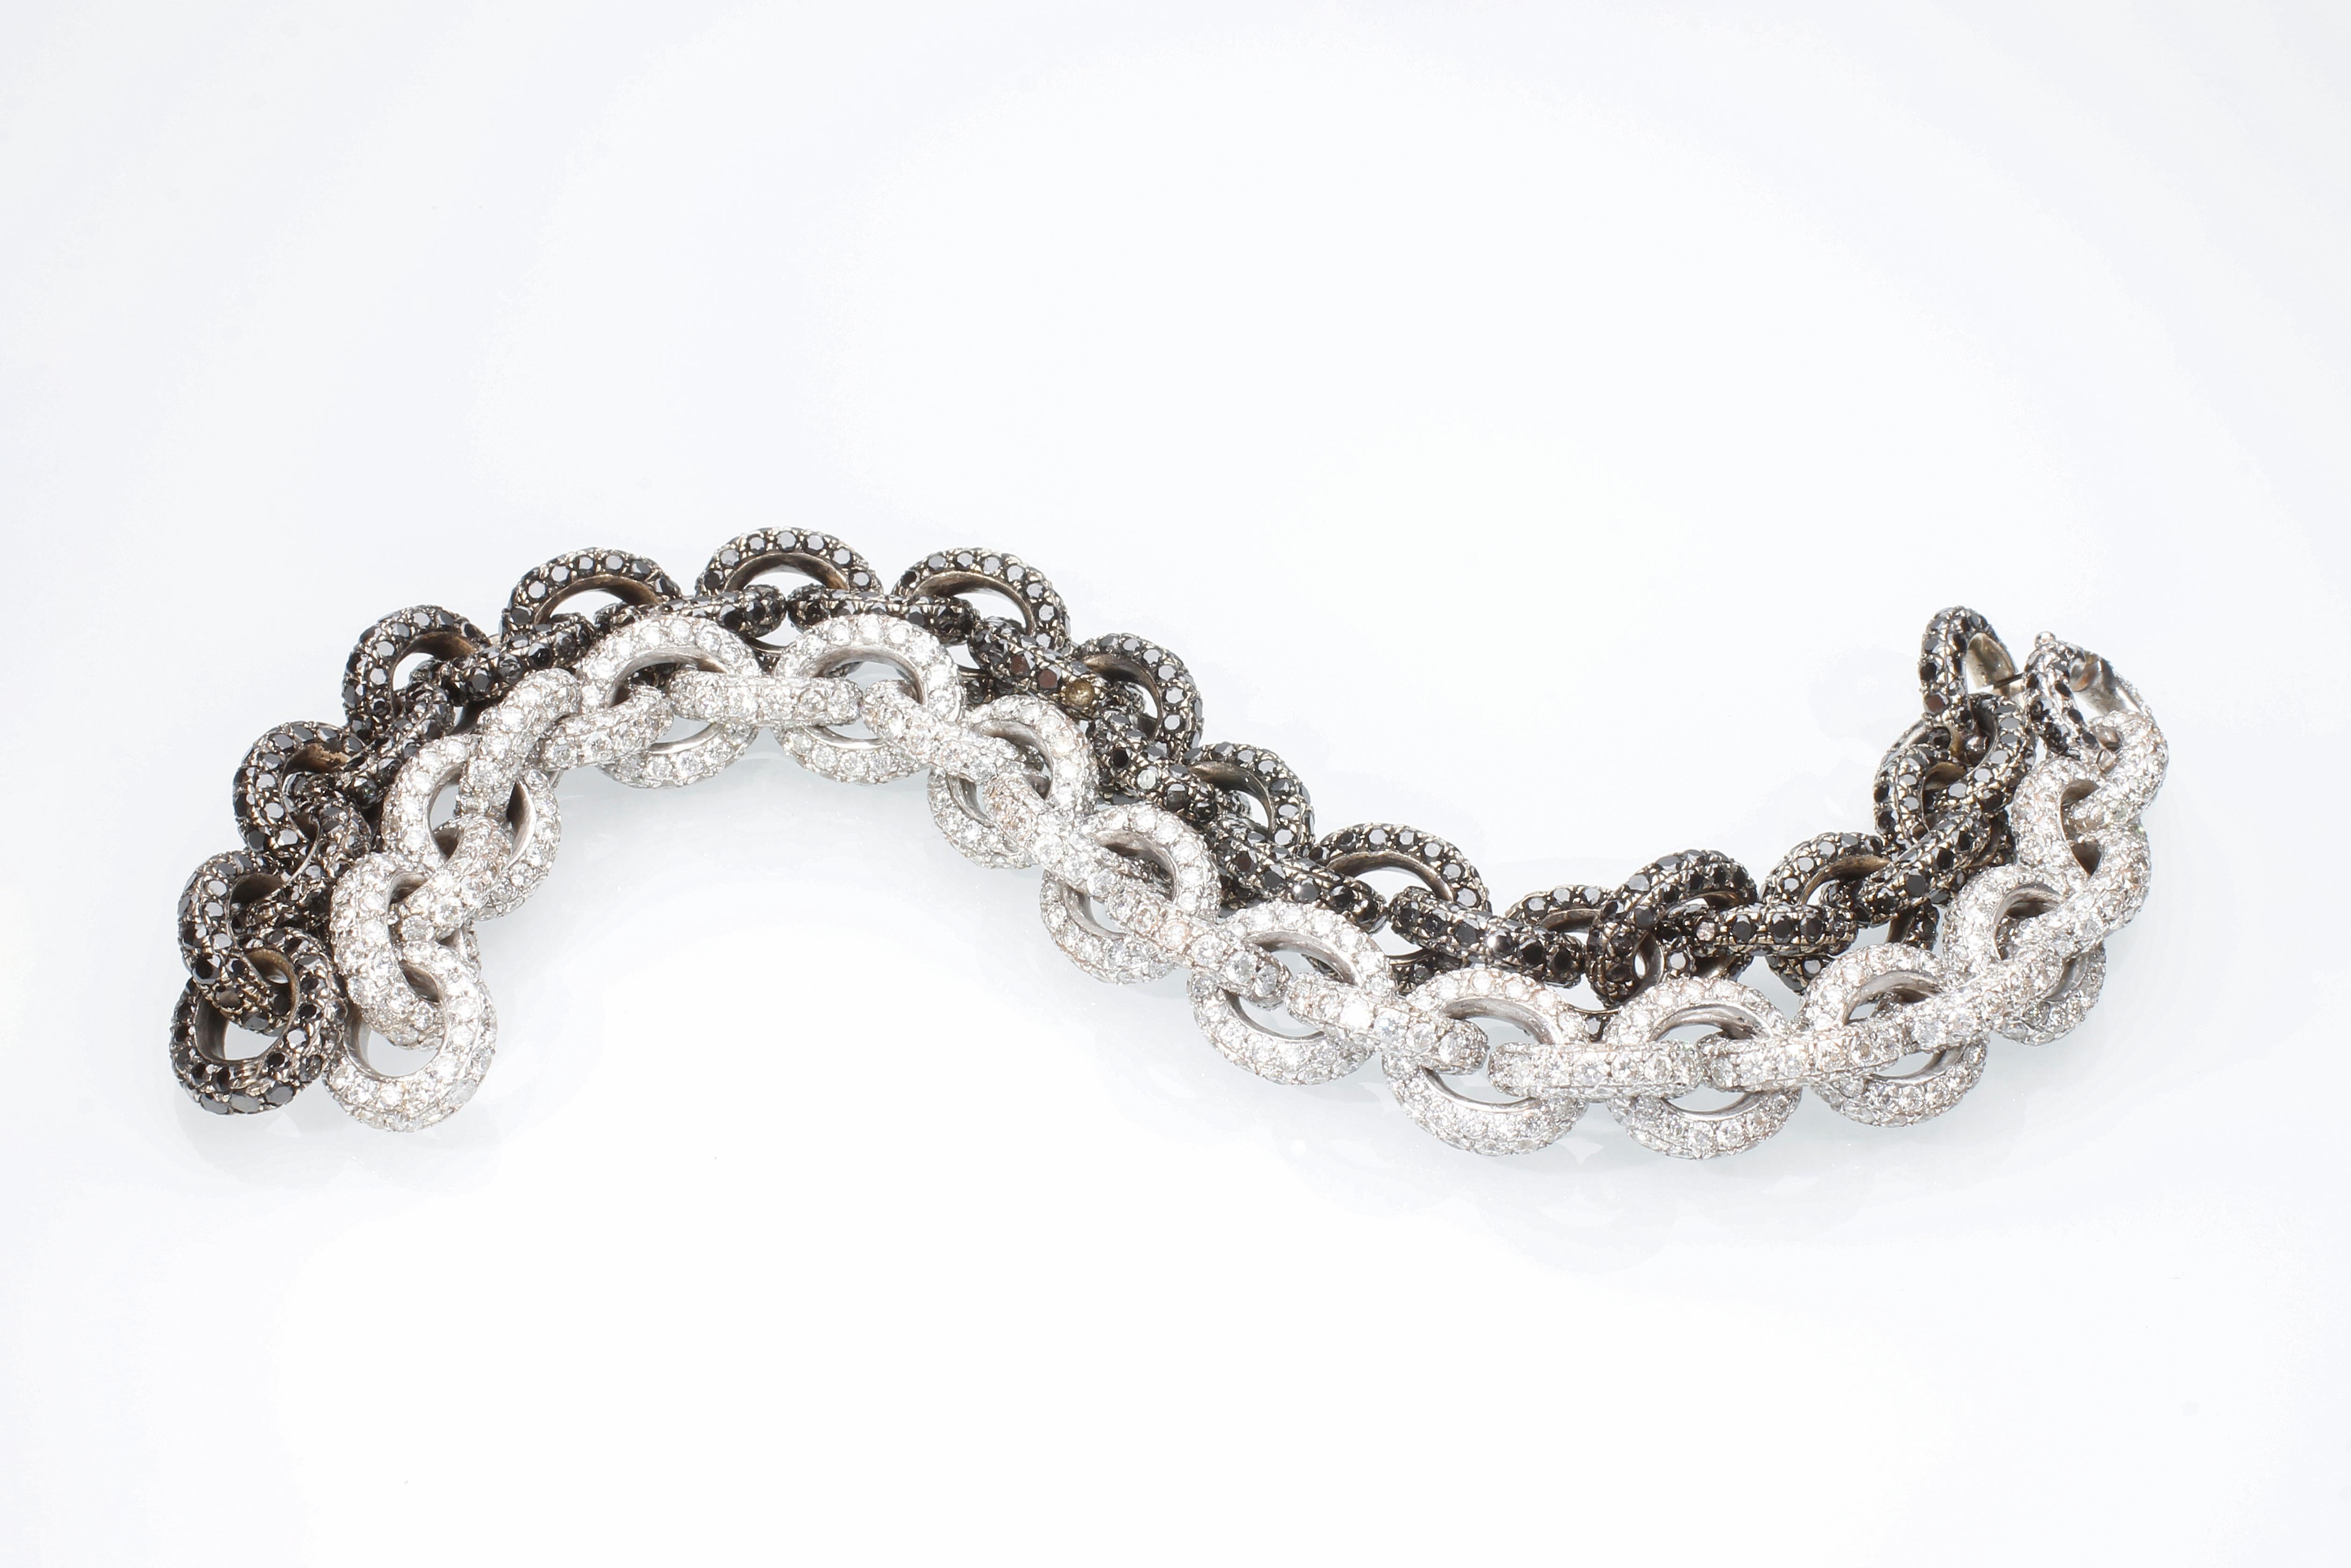 Chain Necklace/Bracelet with 64.26 Ct of White and Black Diamonds. Handmade. For Sale 4